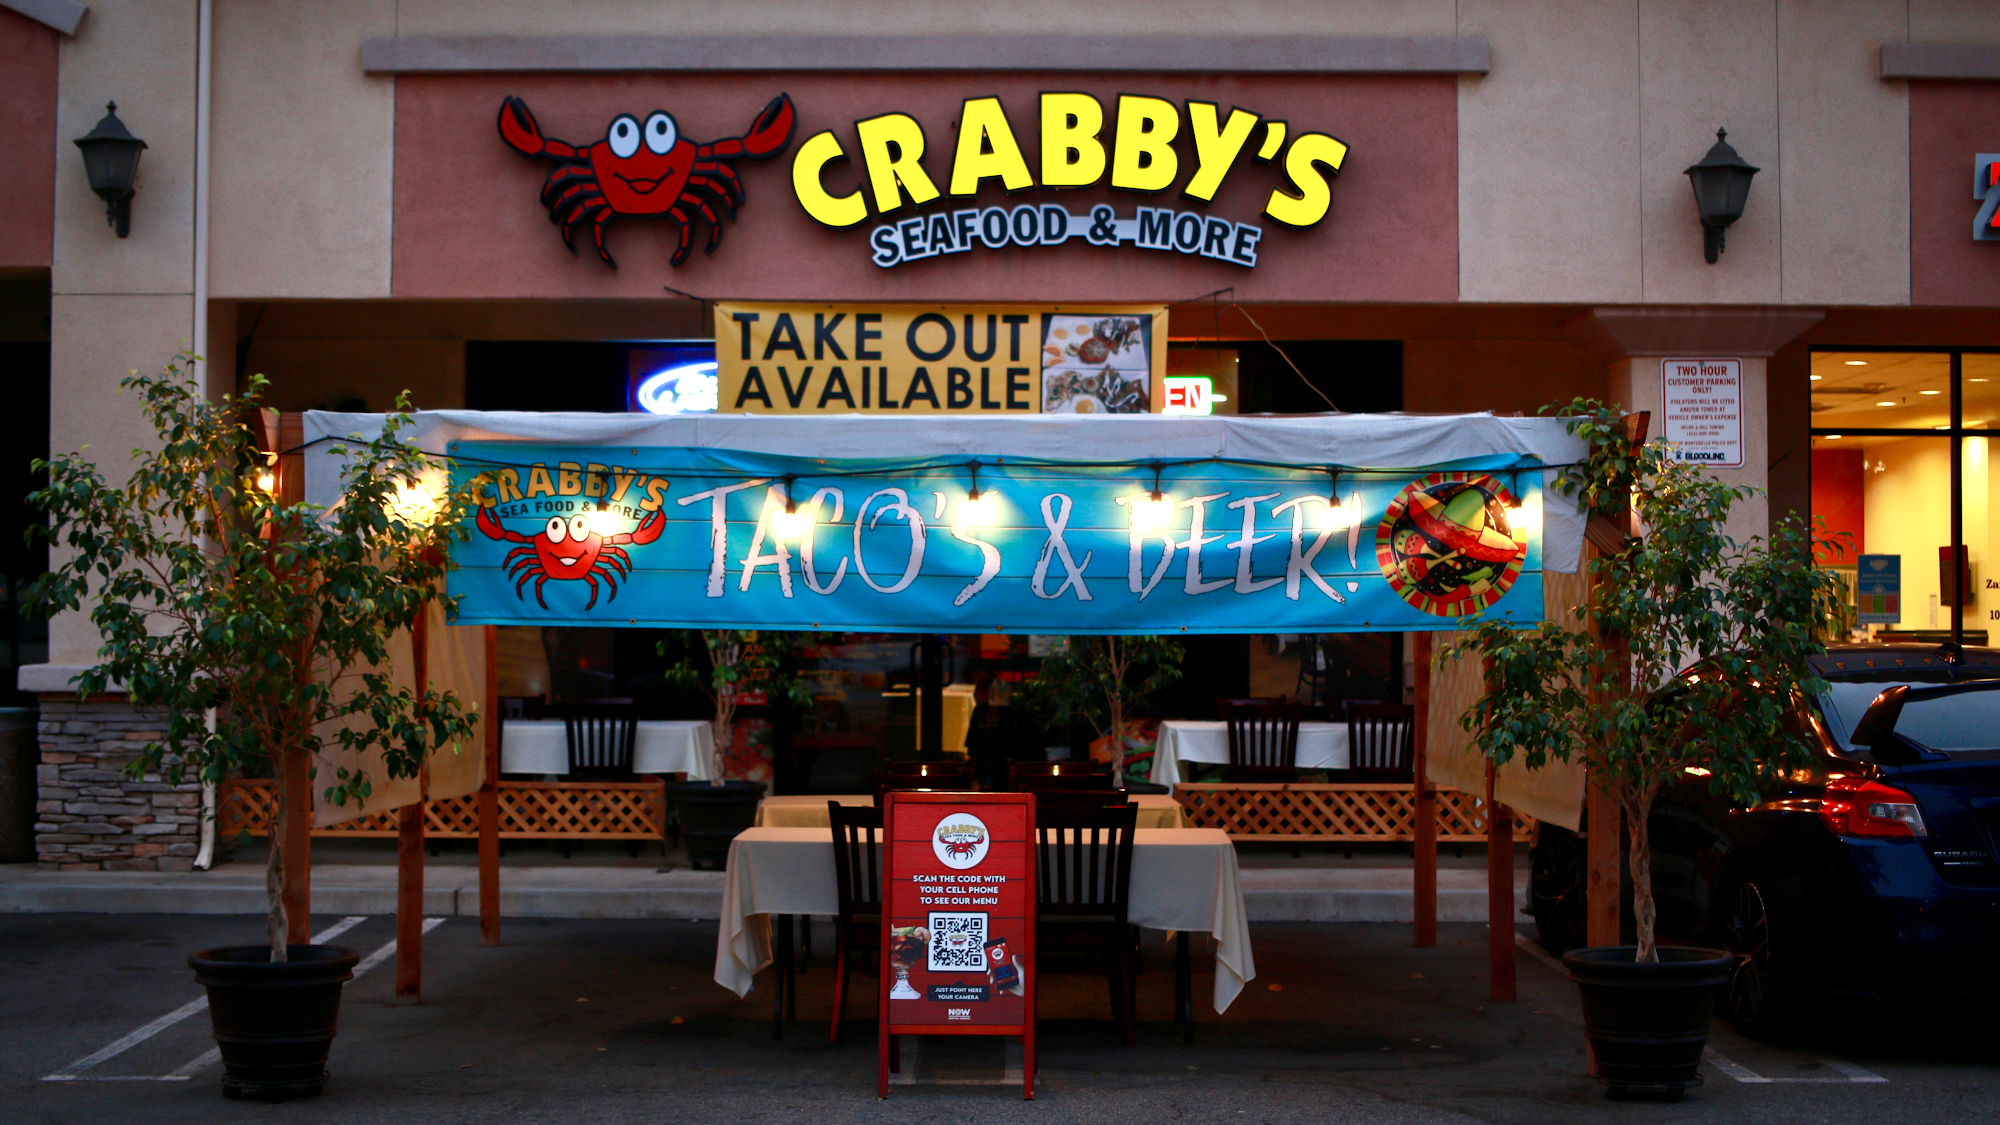 Crabby's Seafood & More